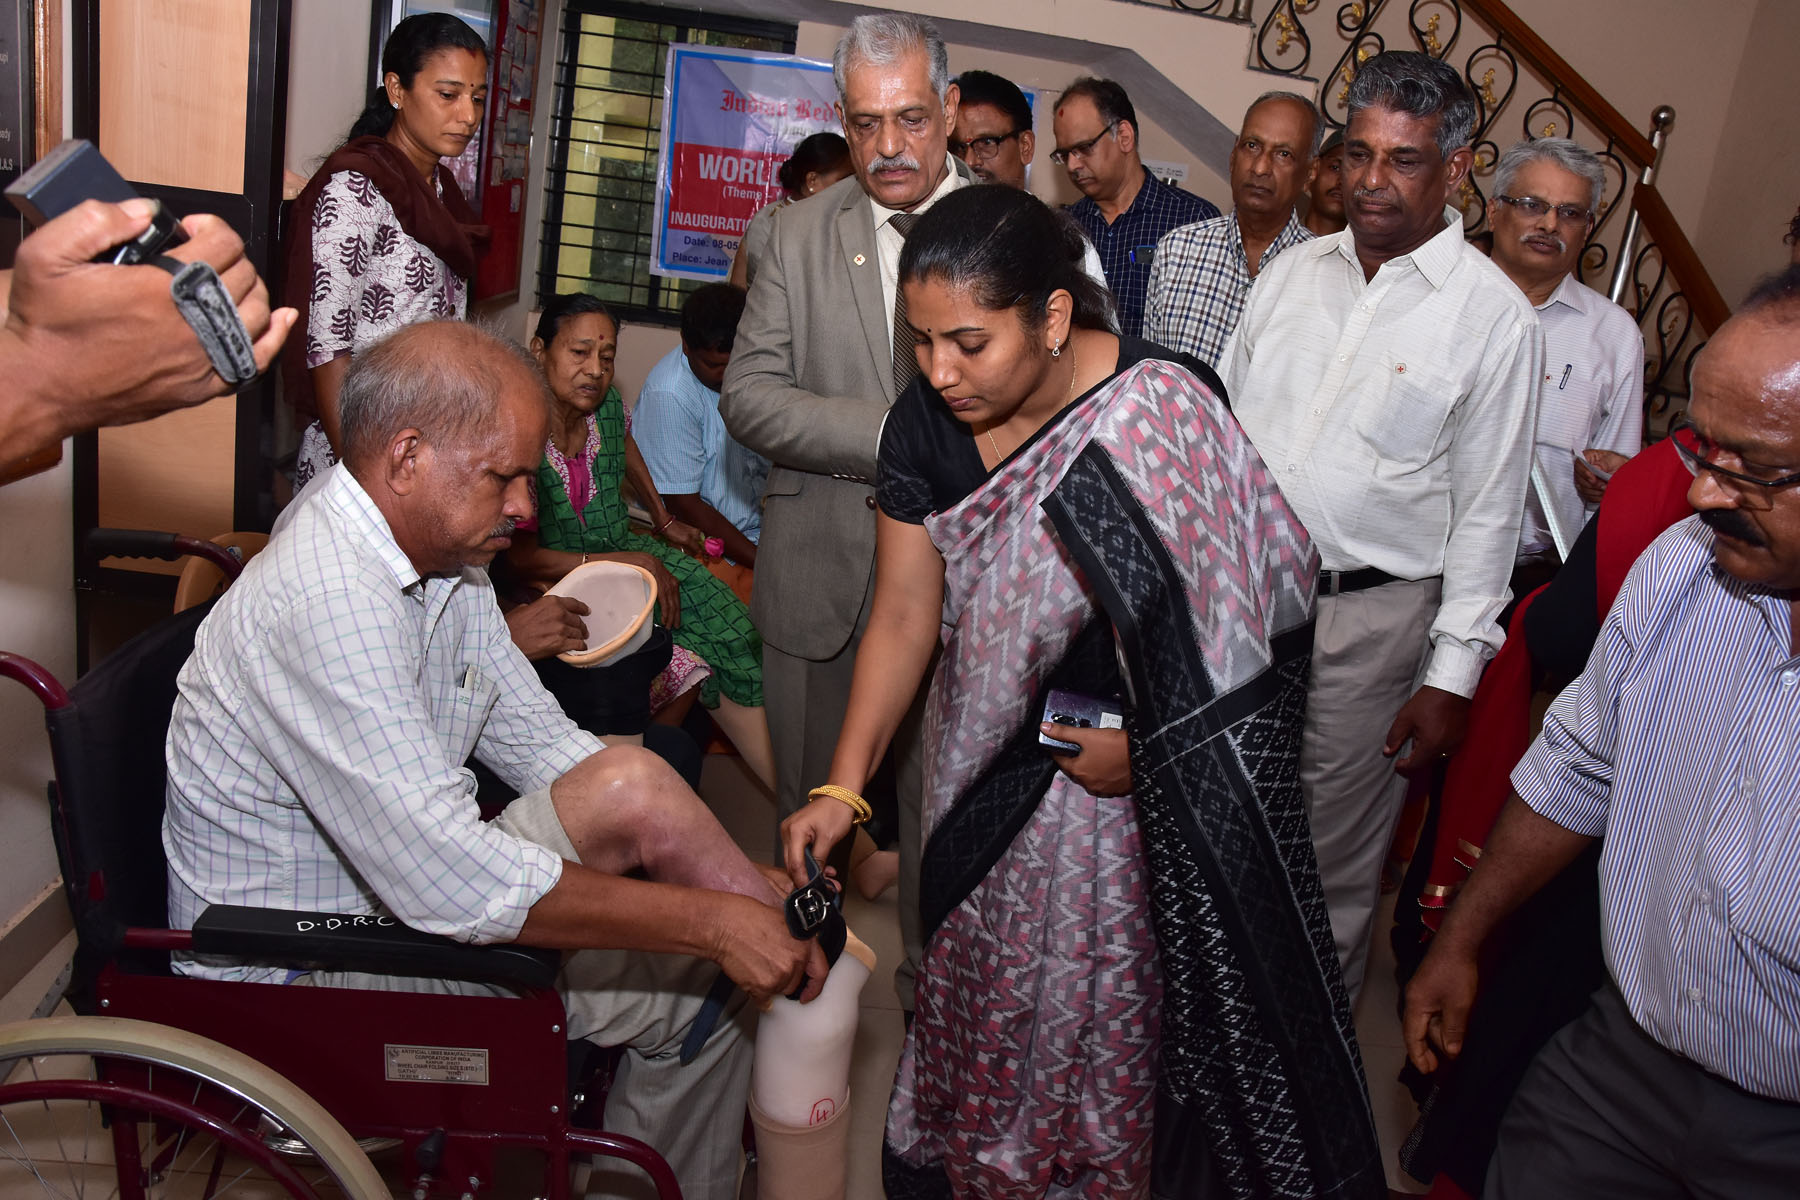 District administration provides all support for betterment of differently-abled persons - DC